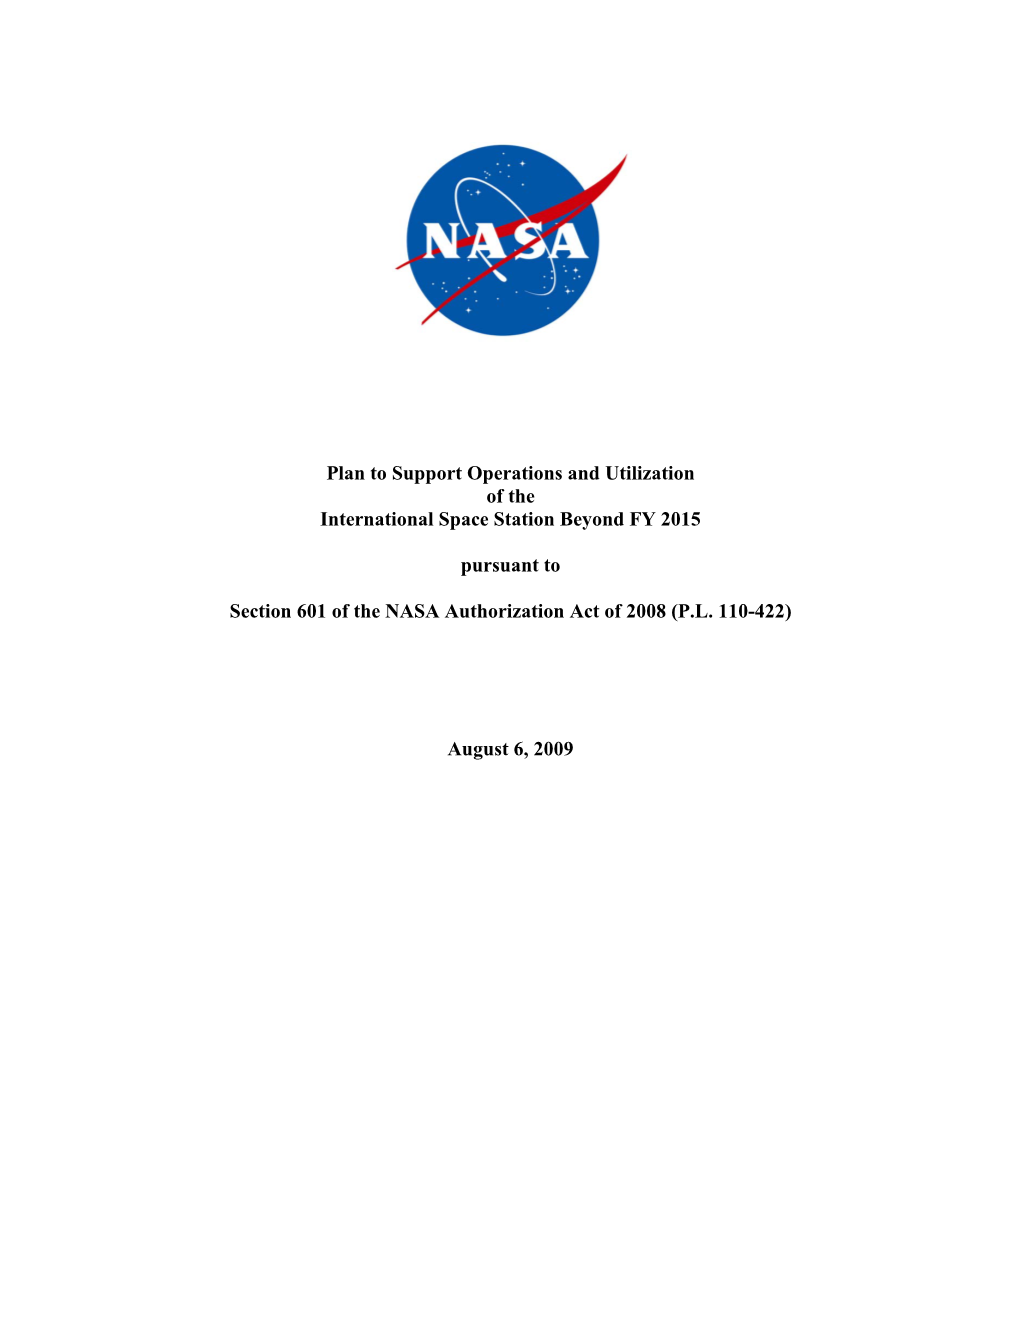 Plan to Support Operations and Utilization of the International Space Station Beyond FY 2015